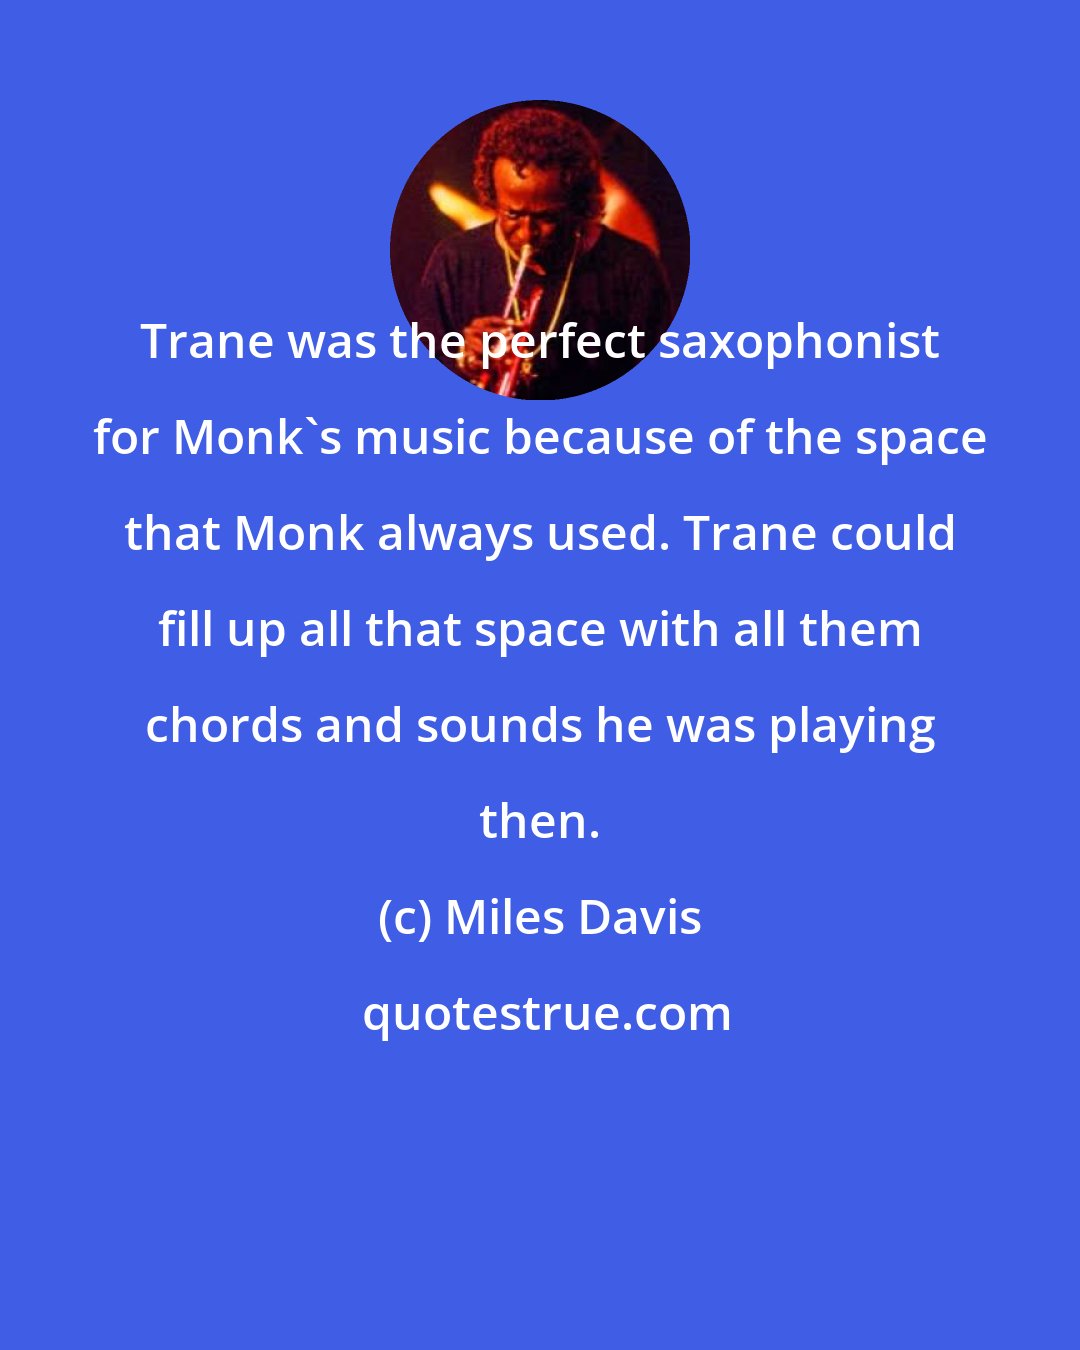 Miles Davis: Trane was the perfect saxophonist for Monk's music because of the space that Monk always used. Trane could fill up all that space with all them chords and sounds he was playing then.